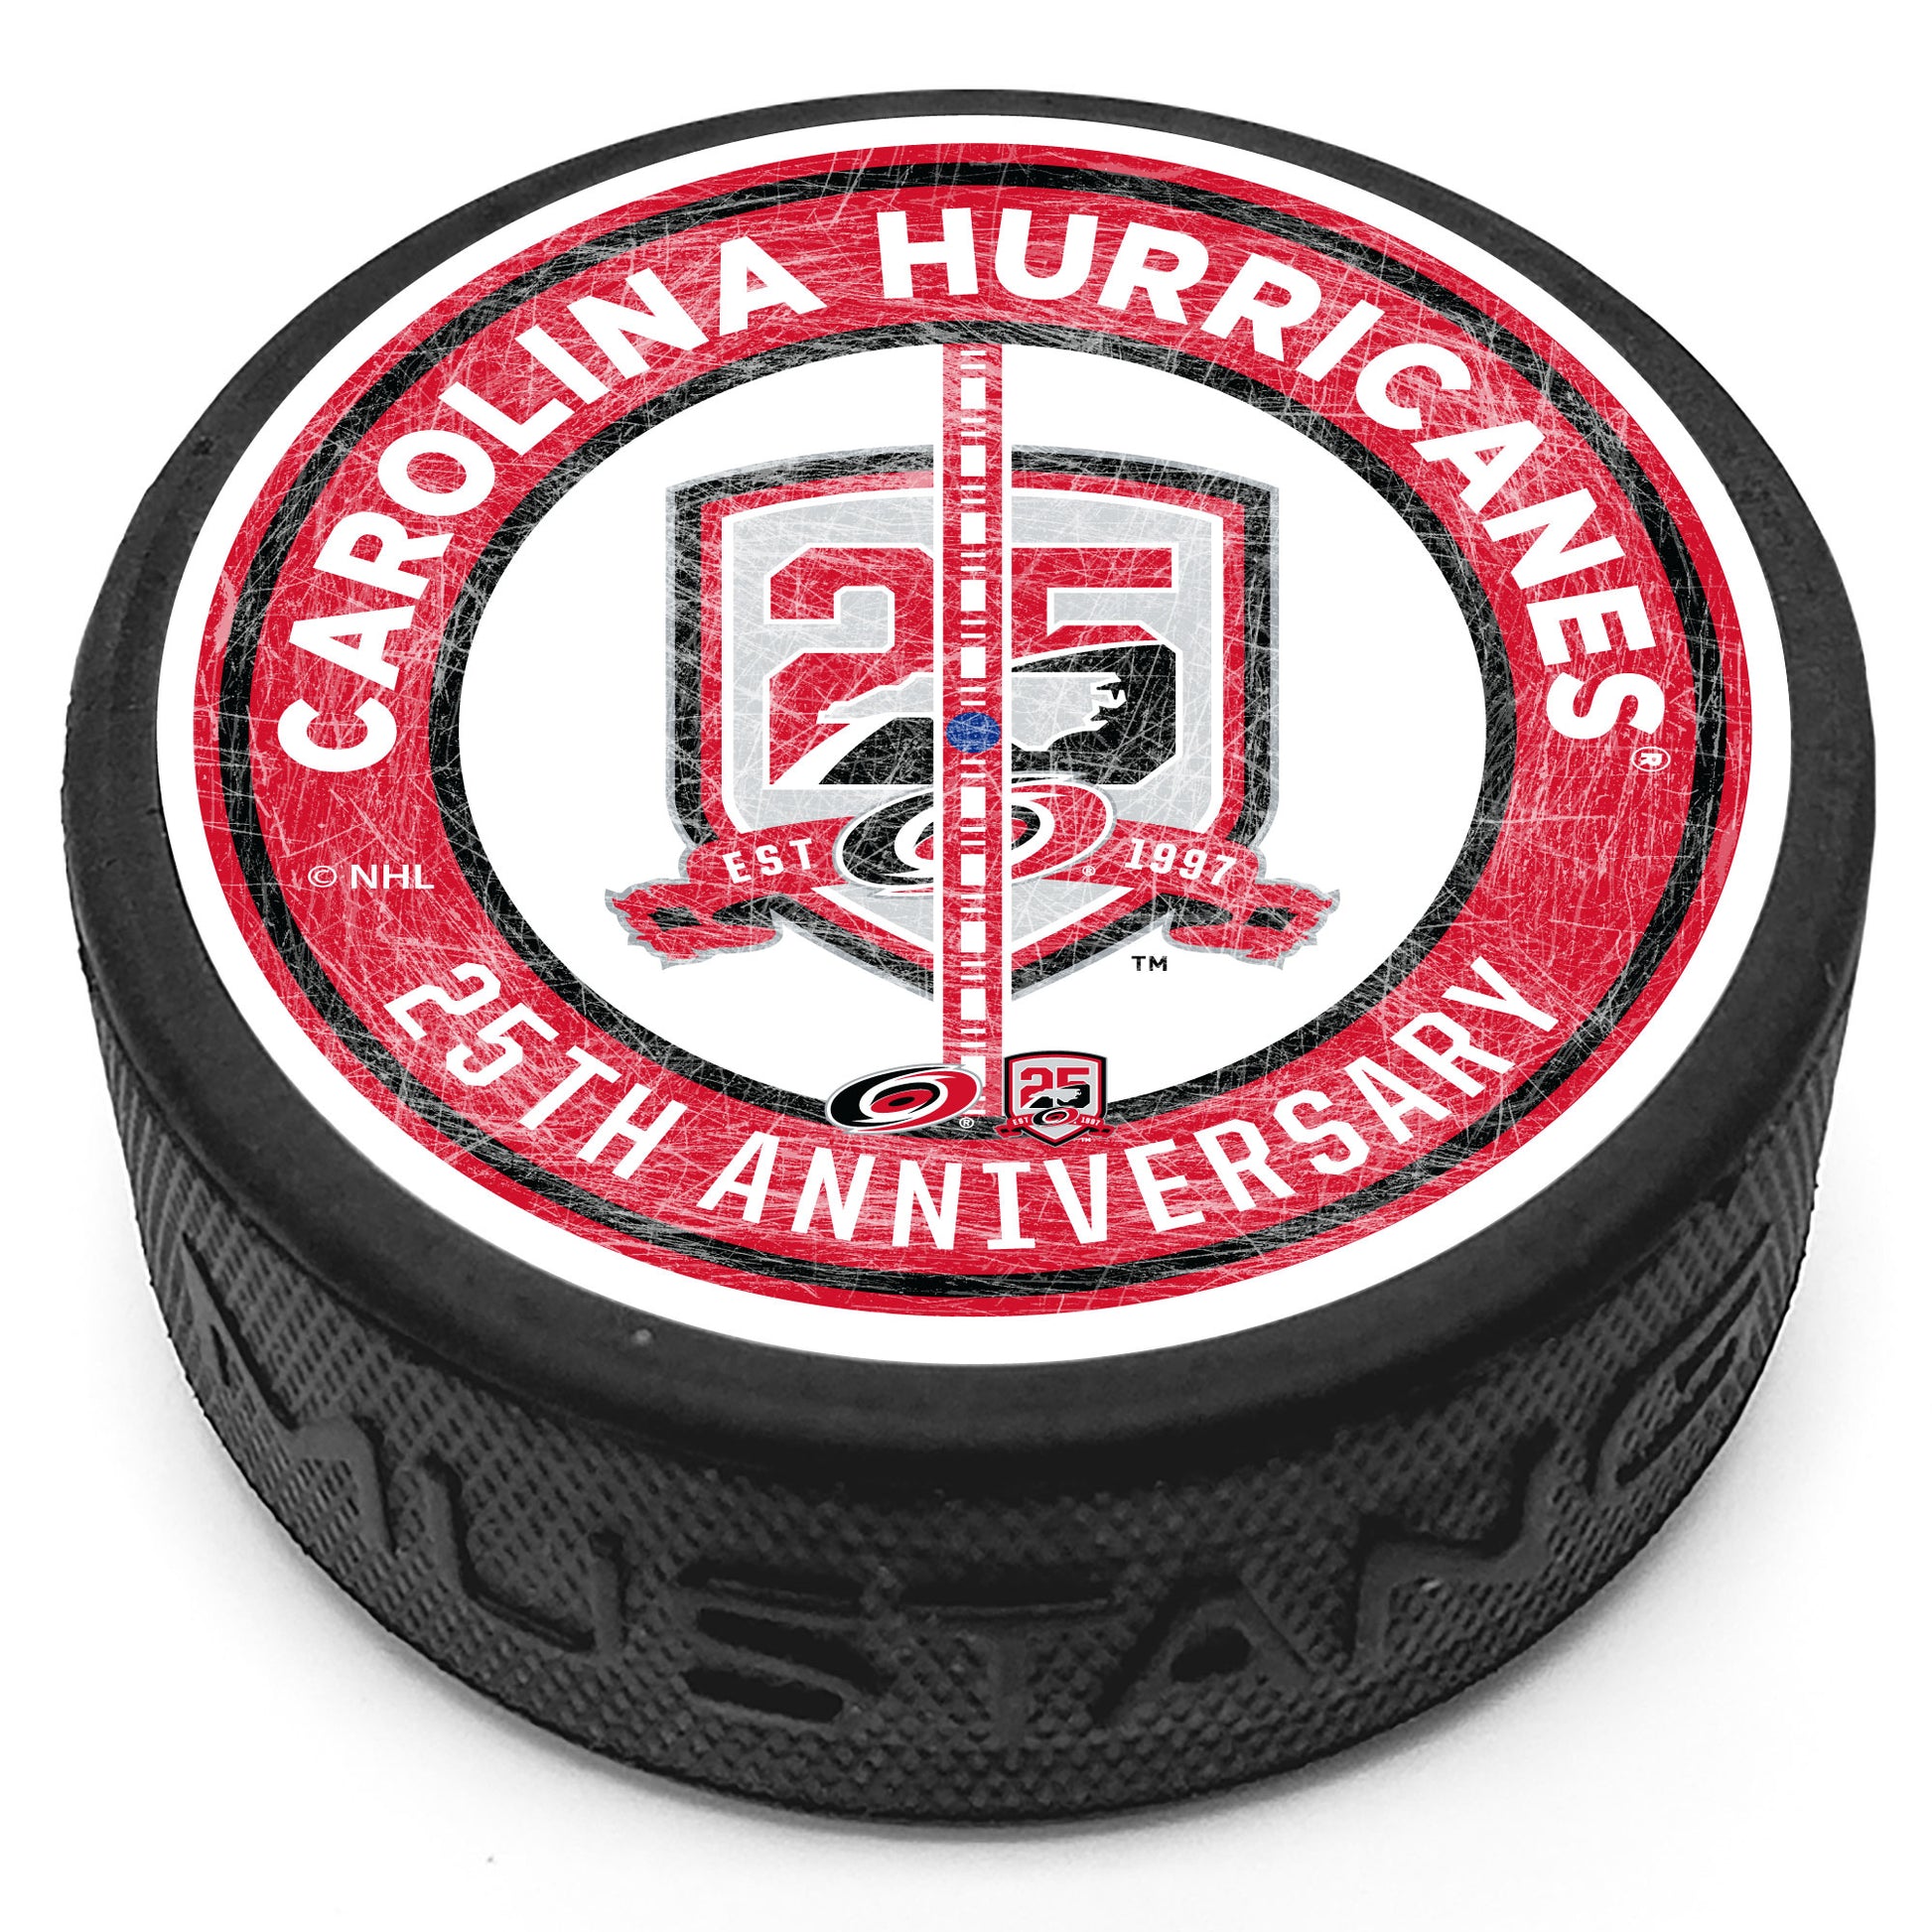 Hockey puck with the Hurricanes 25th Anniversary special center ice logo and center ice line and "Carolina Hurricanes 25th Anniversary" on the top face.